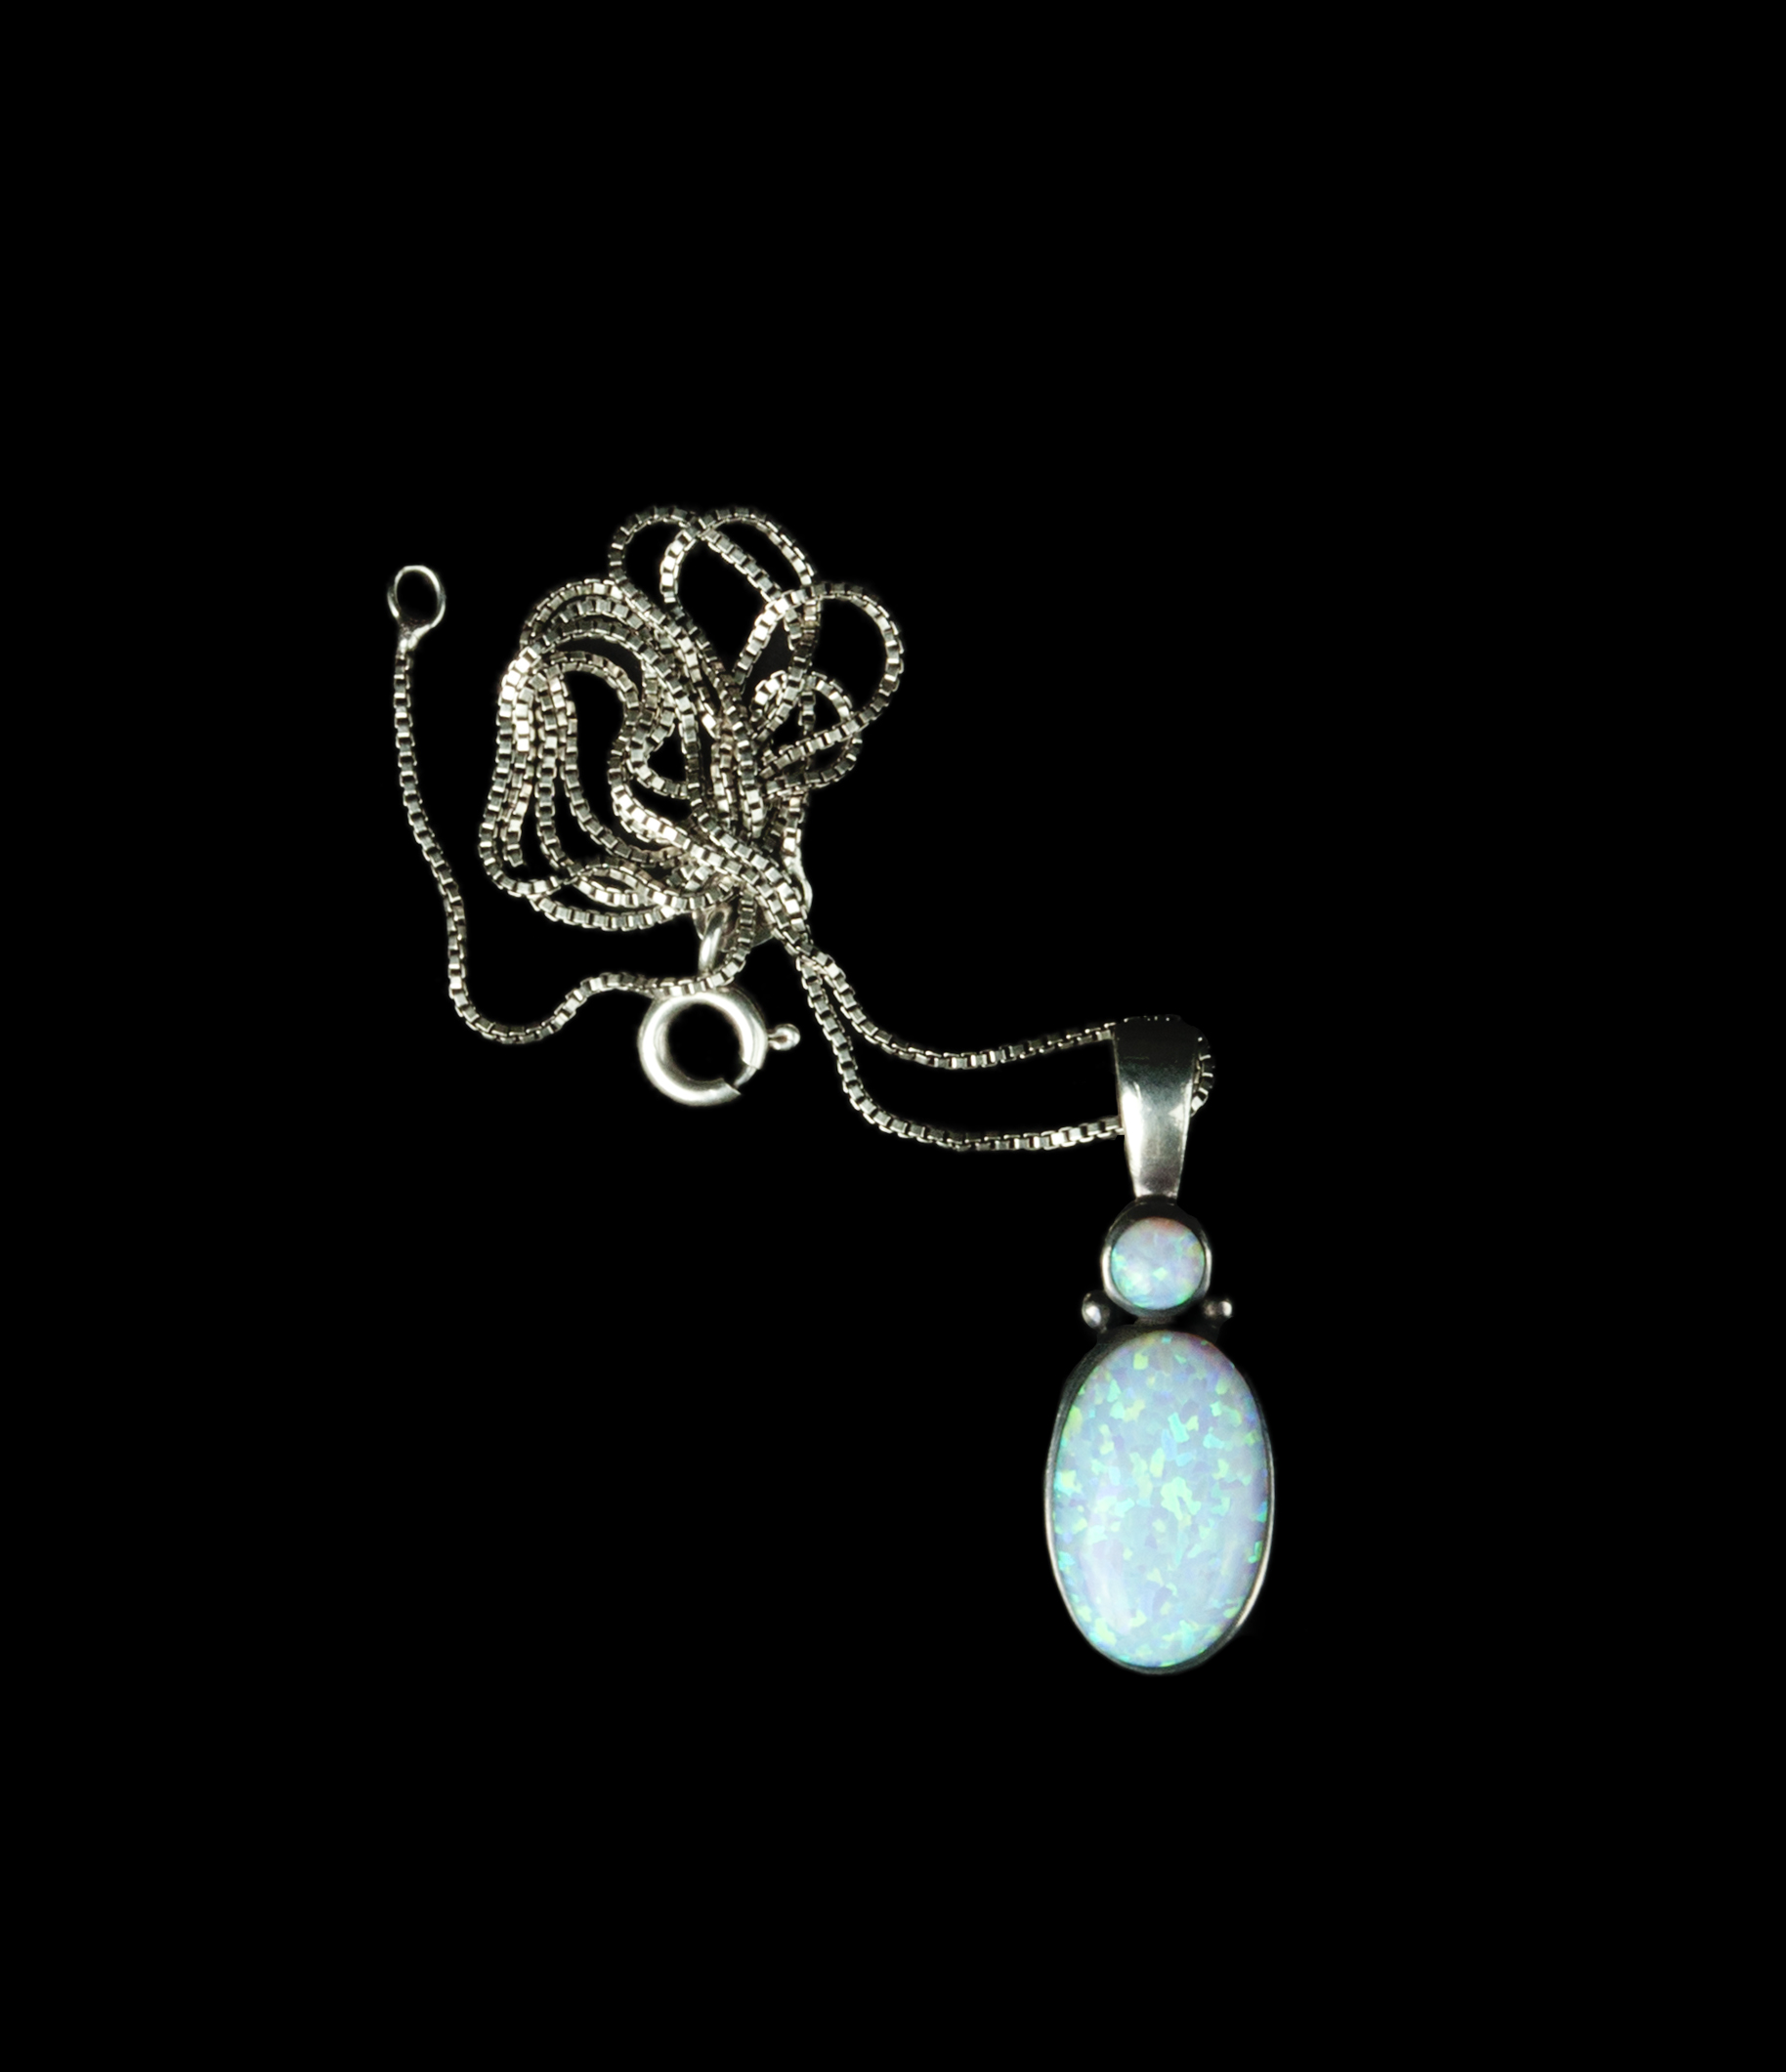  An oval moonstone pendant topped with a small round moonstone accent in a simple silver setting on a silver box chain which is coiled above it.   